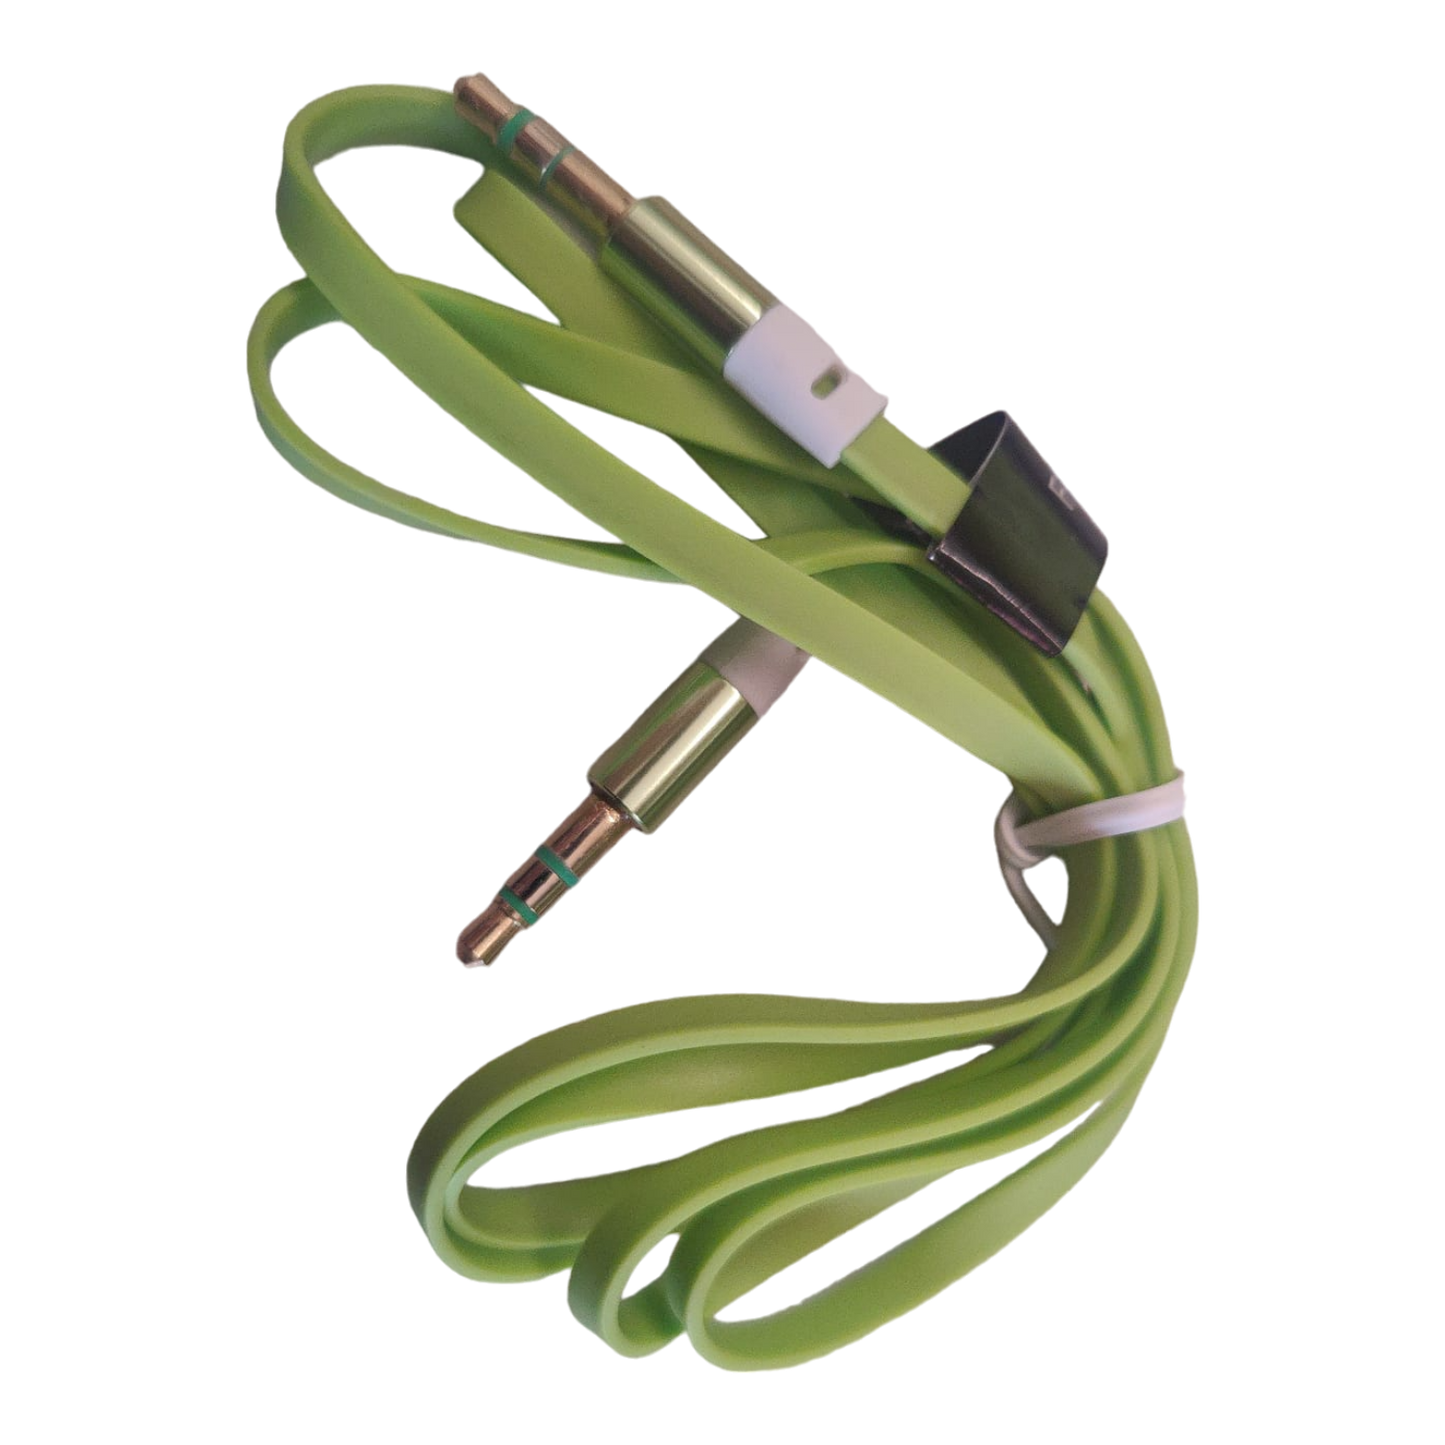 Audio cable - jack cable - 3.5 mm / green / jack Aux audio cable